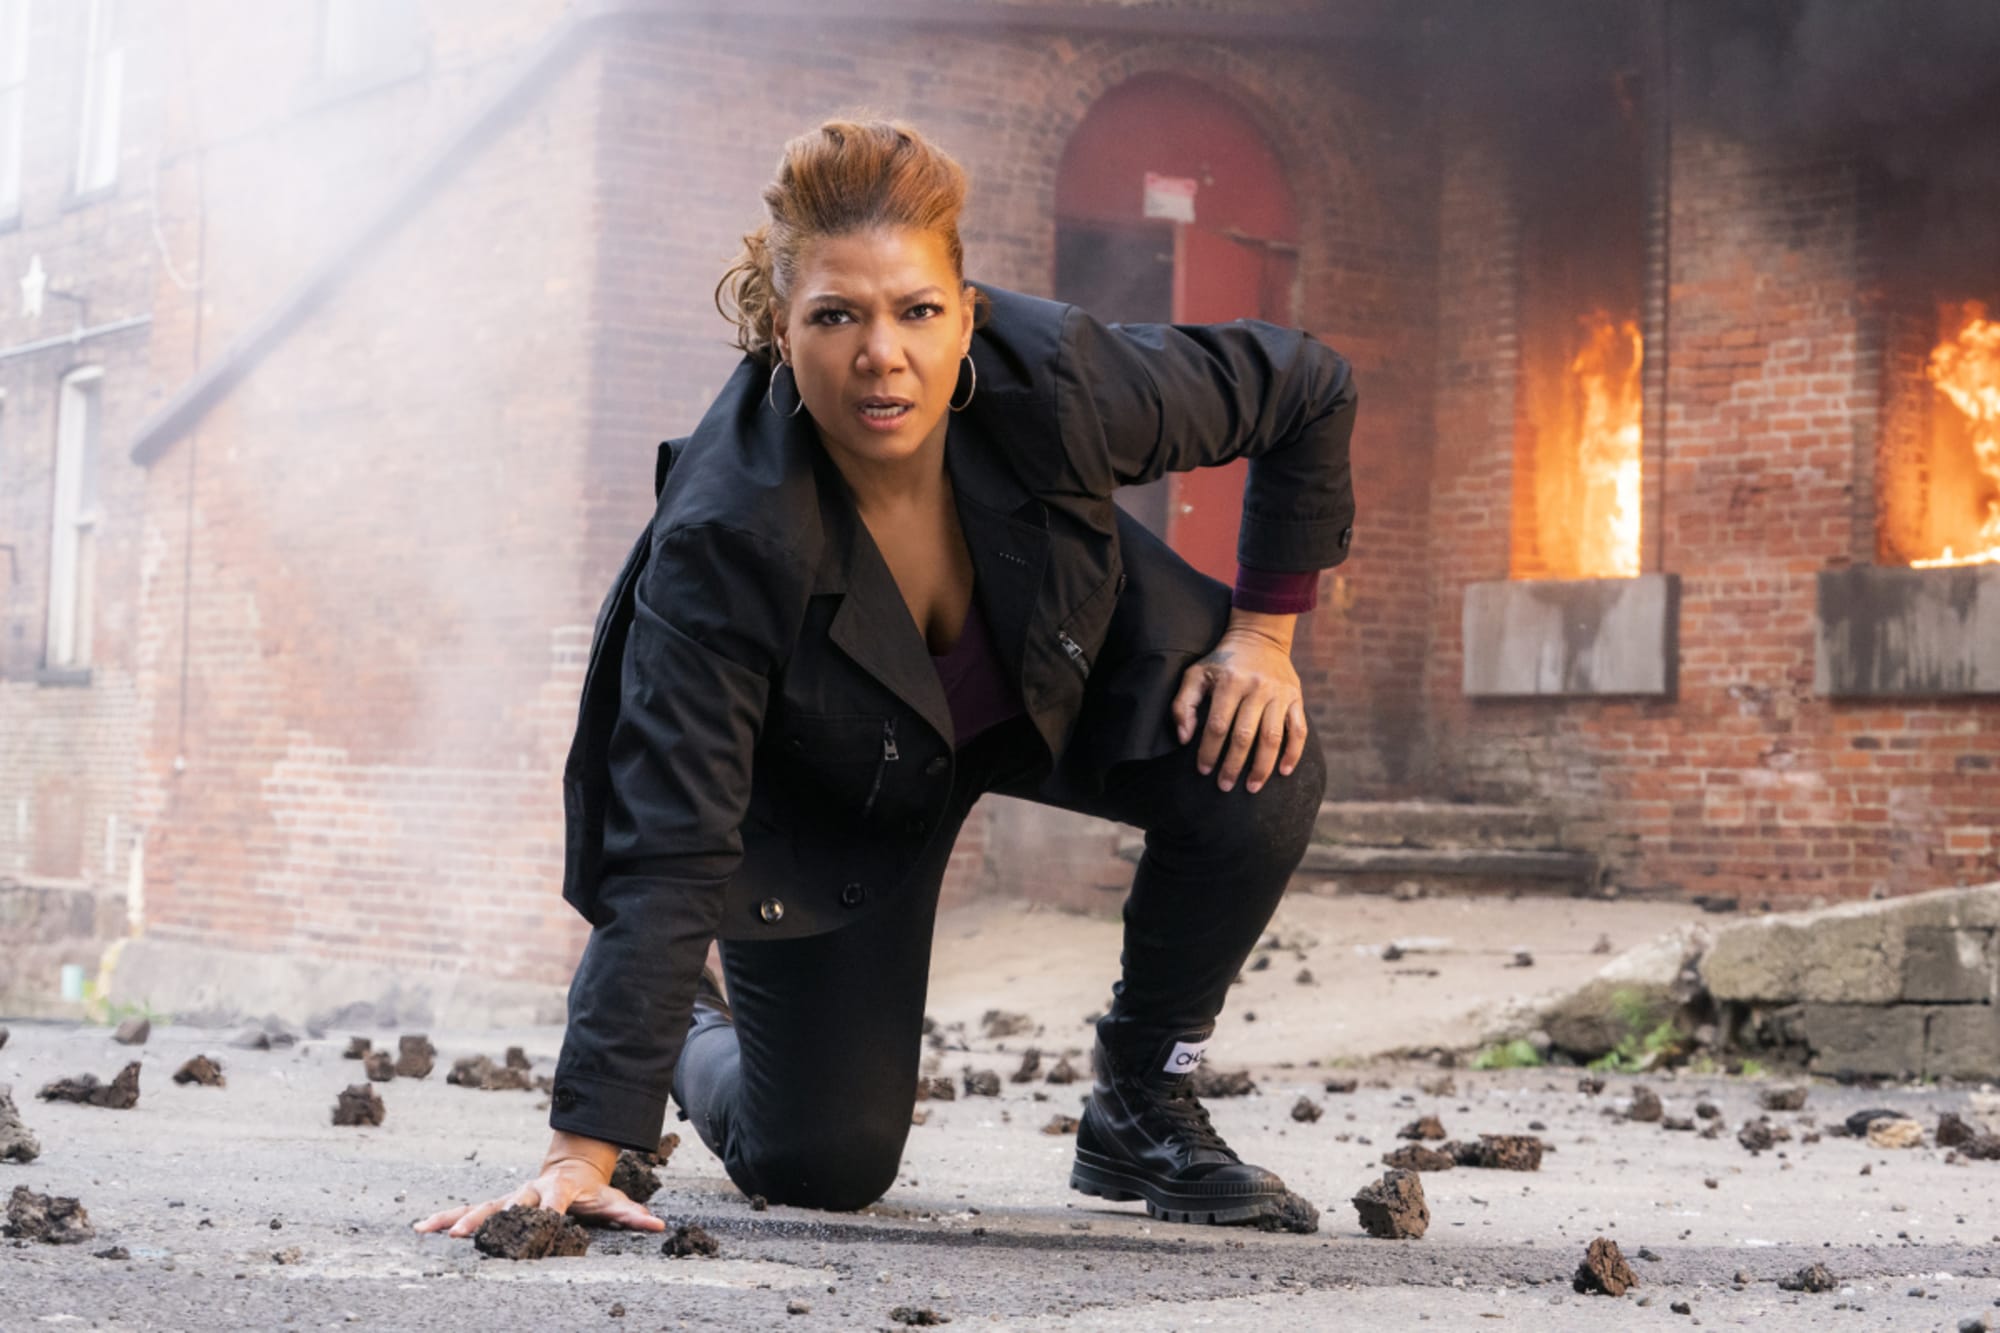 Extended TV Trailer 'The Equalizer' [starring Queen Latifah] That